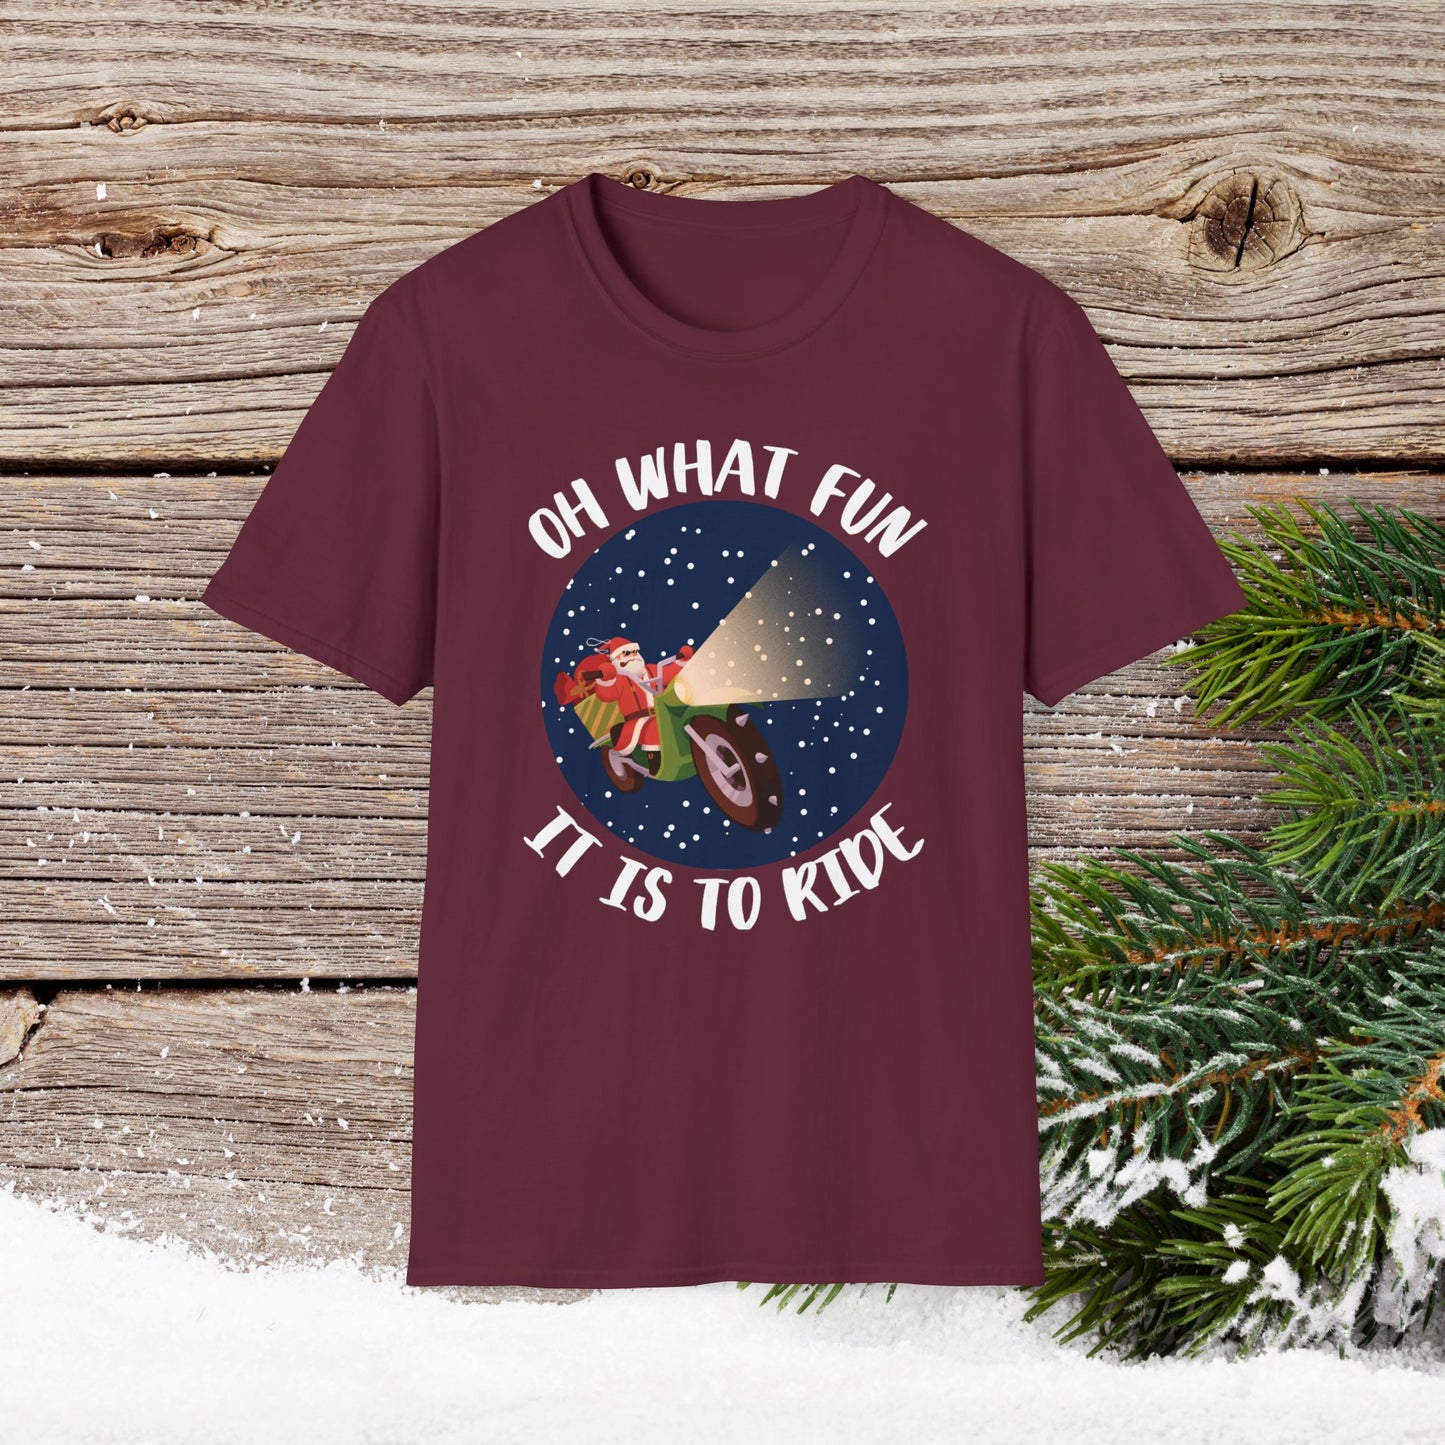 Christmas T-Shirt - Oh What Fun It Is To Ride - Mens anc Boys Christmas Shirts - Youth and Adult Christmas TShirts T-Shirts Graphic Avenue Maroon Adult Small 